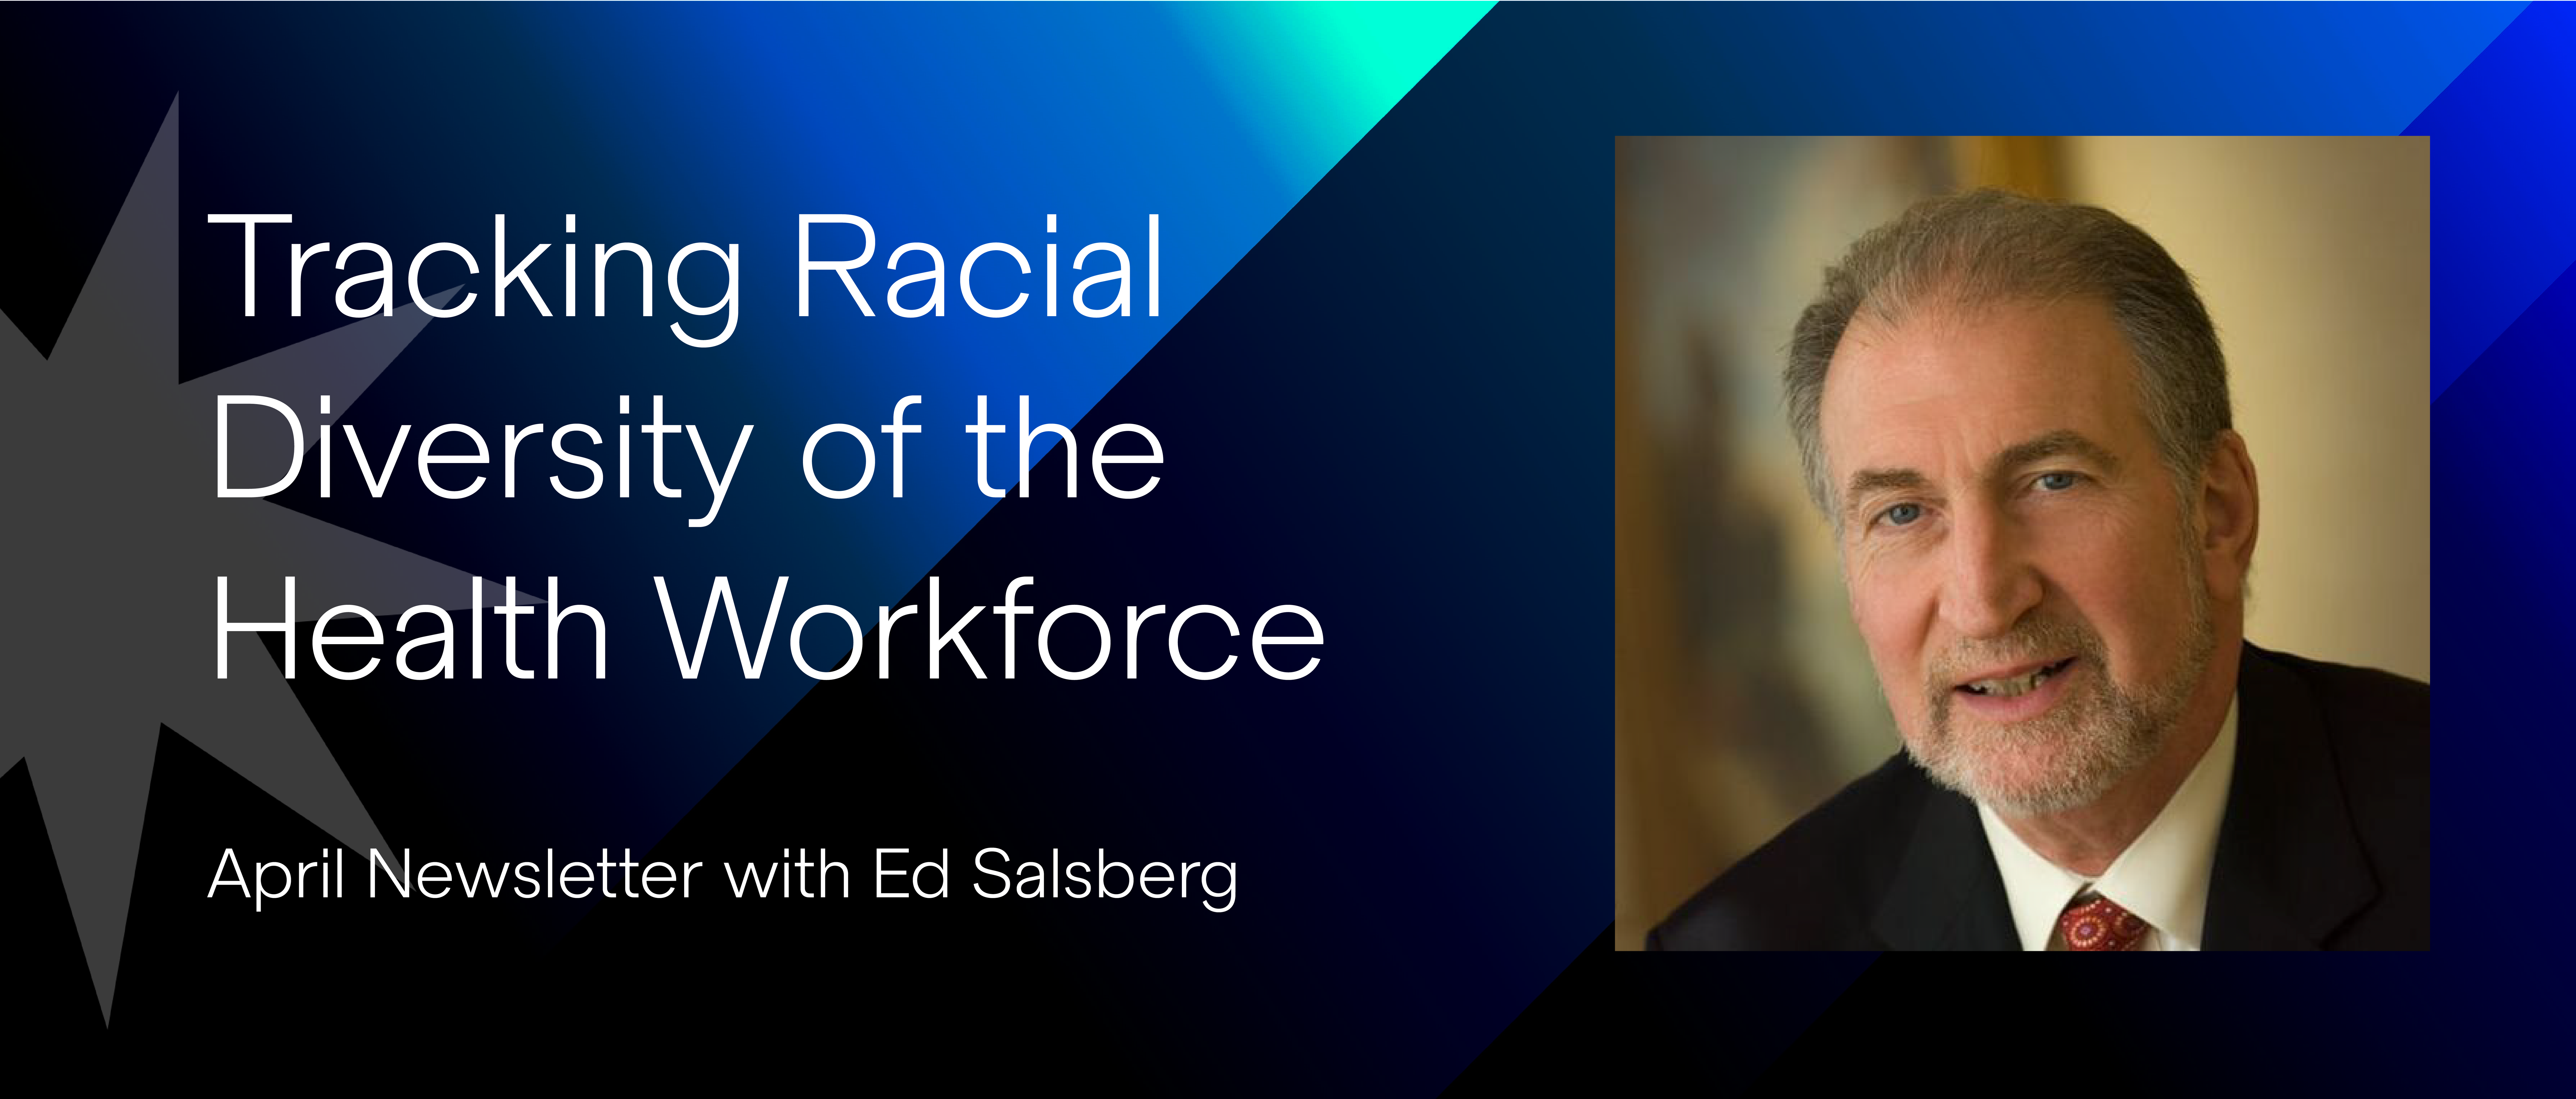 Tracking Racial Diversity of the Health Workforce. April Newsletter with Ed Salsberg